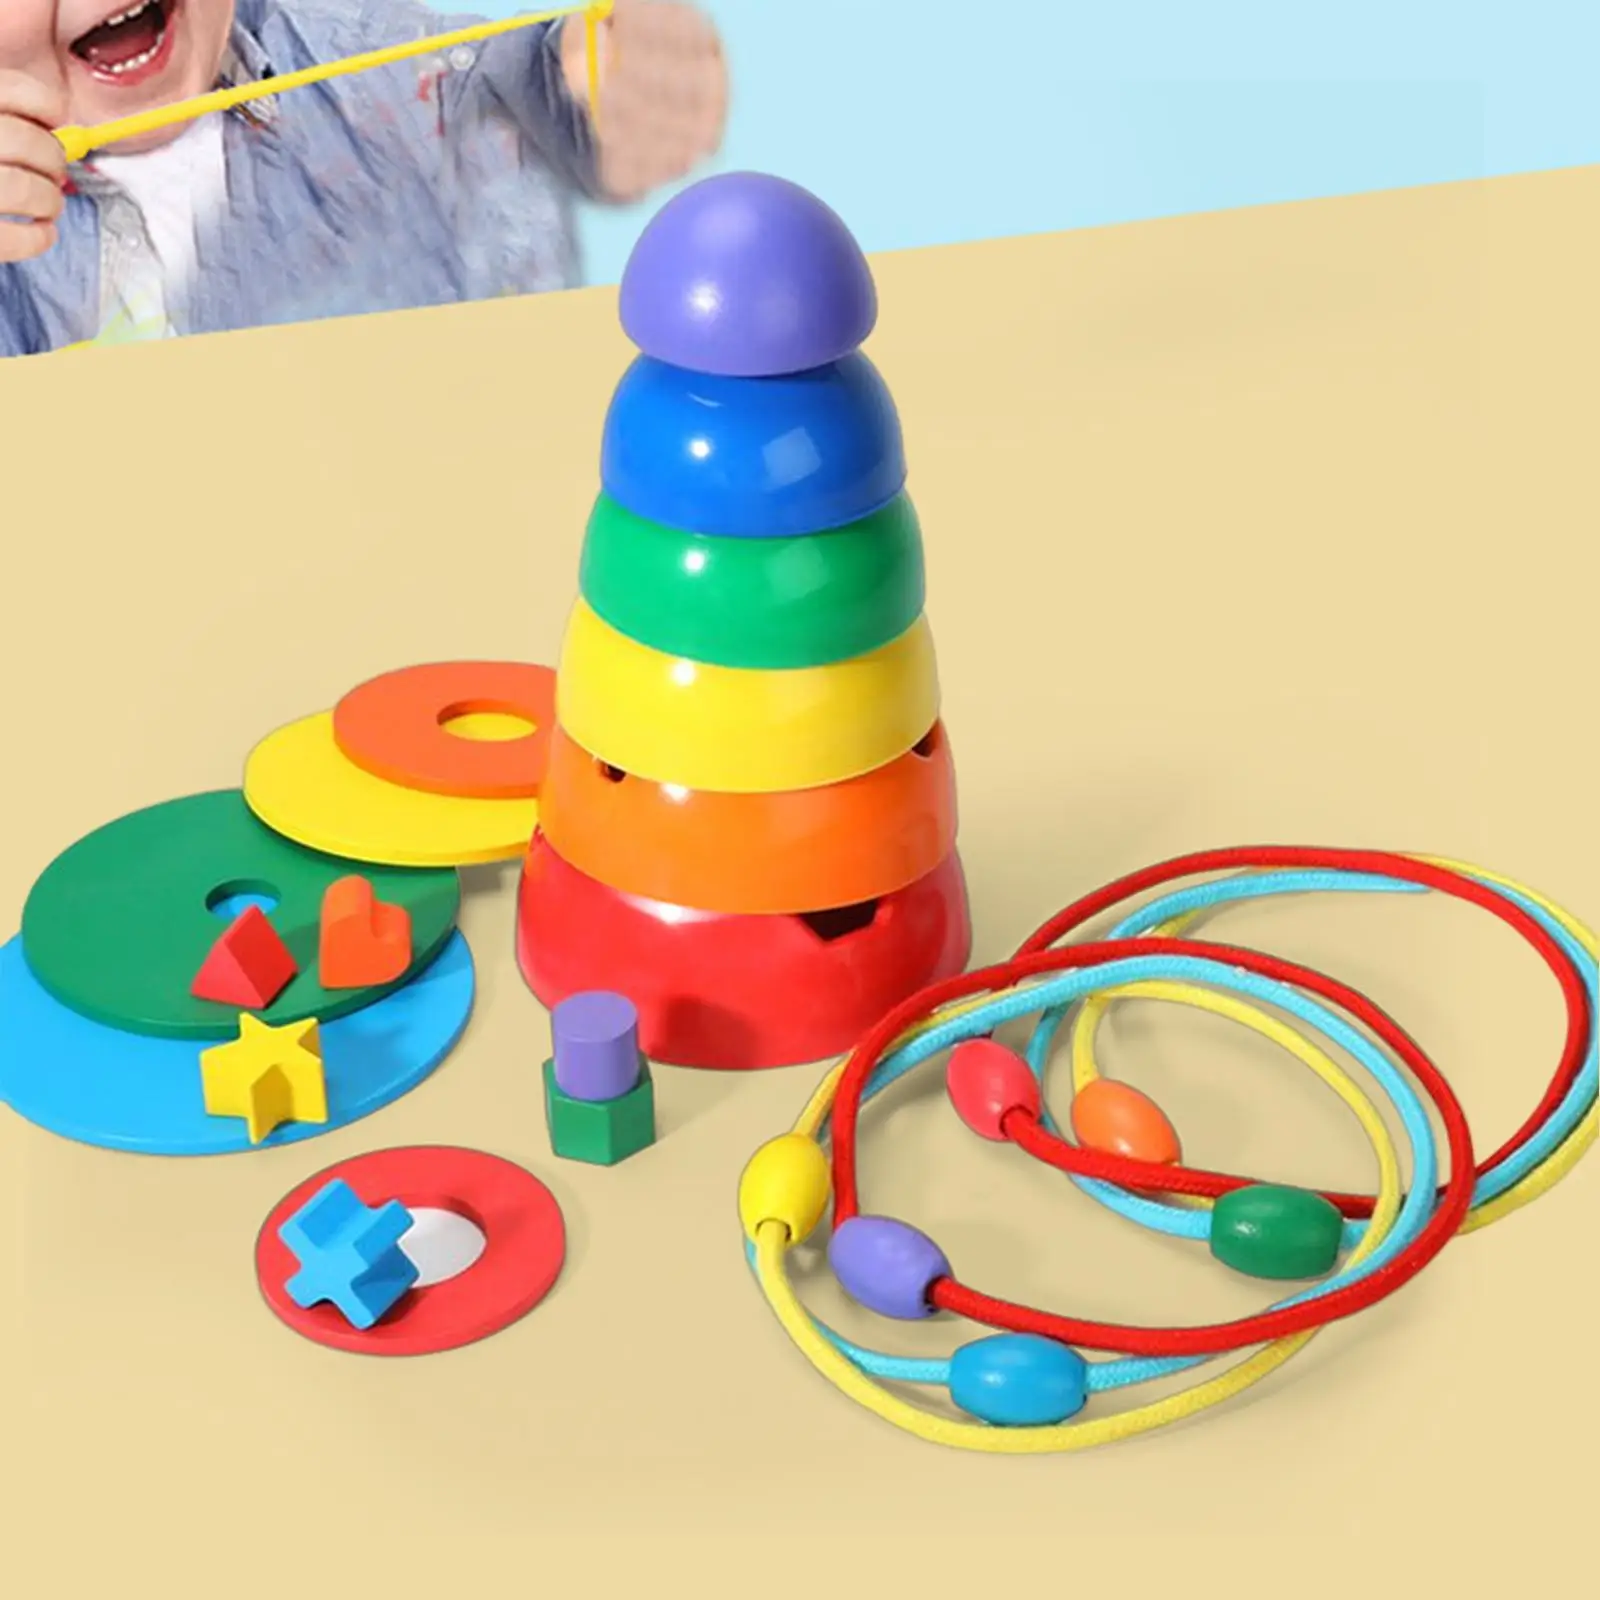 Colorful Nesting Building Stacking Blocks Toy Development Toy for Toddler